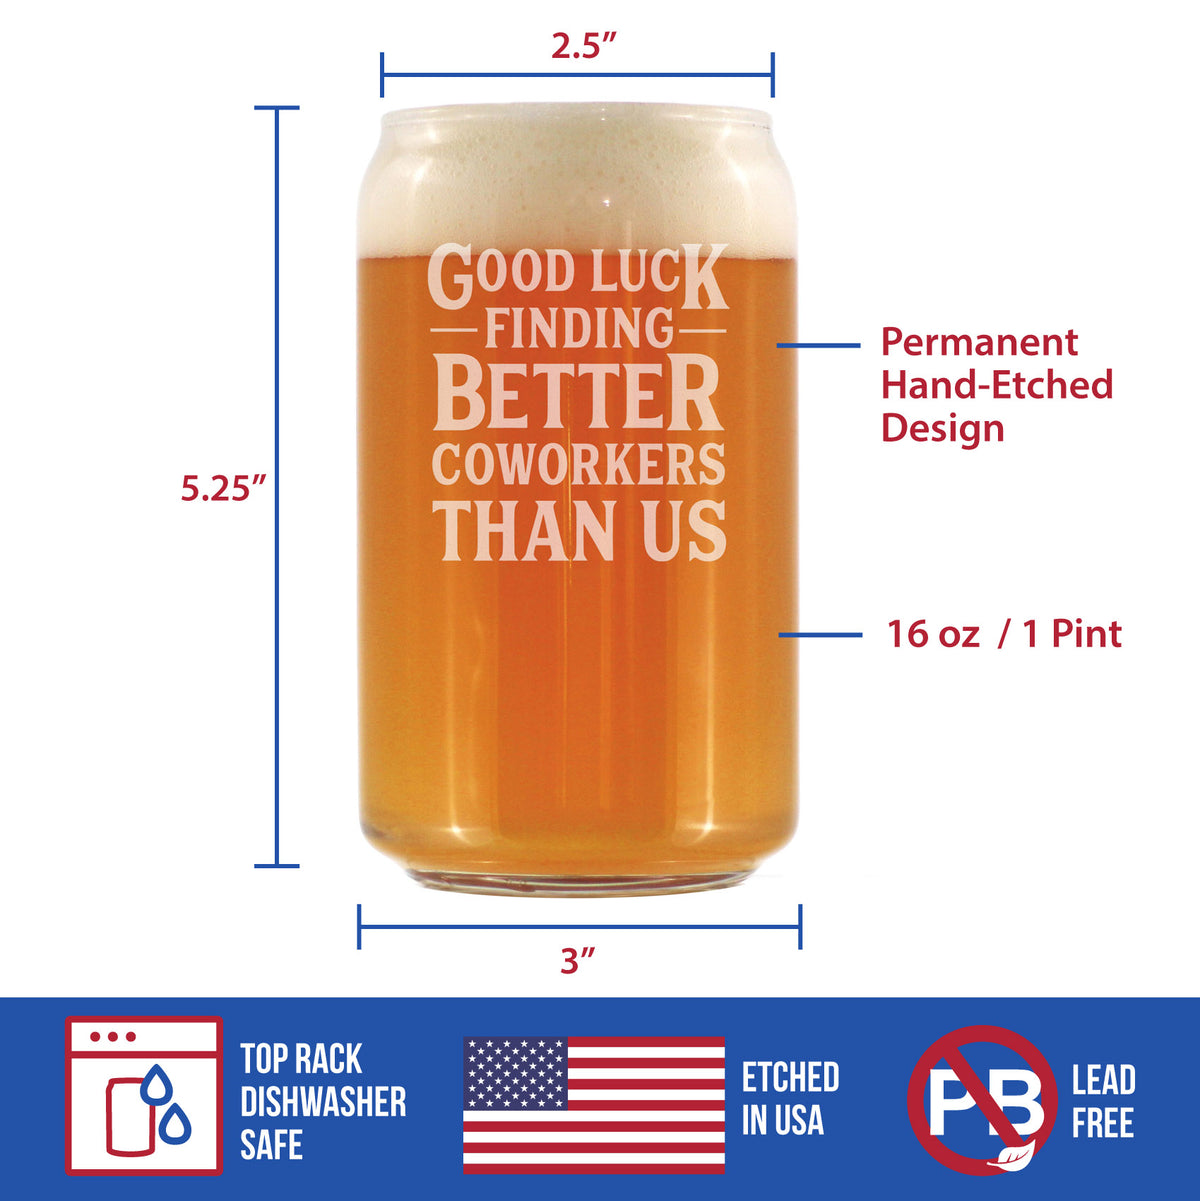 Good Luck Finding Better Coworkers Than Us - Beer Can Pint Glass - Funny Beer Gift for Coworker - Fun Office Gifts